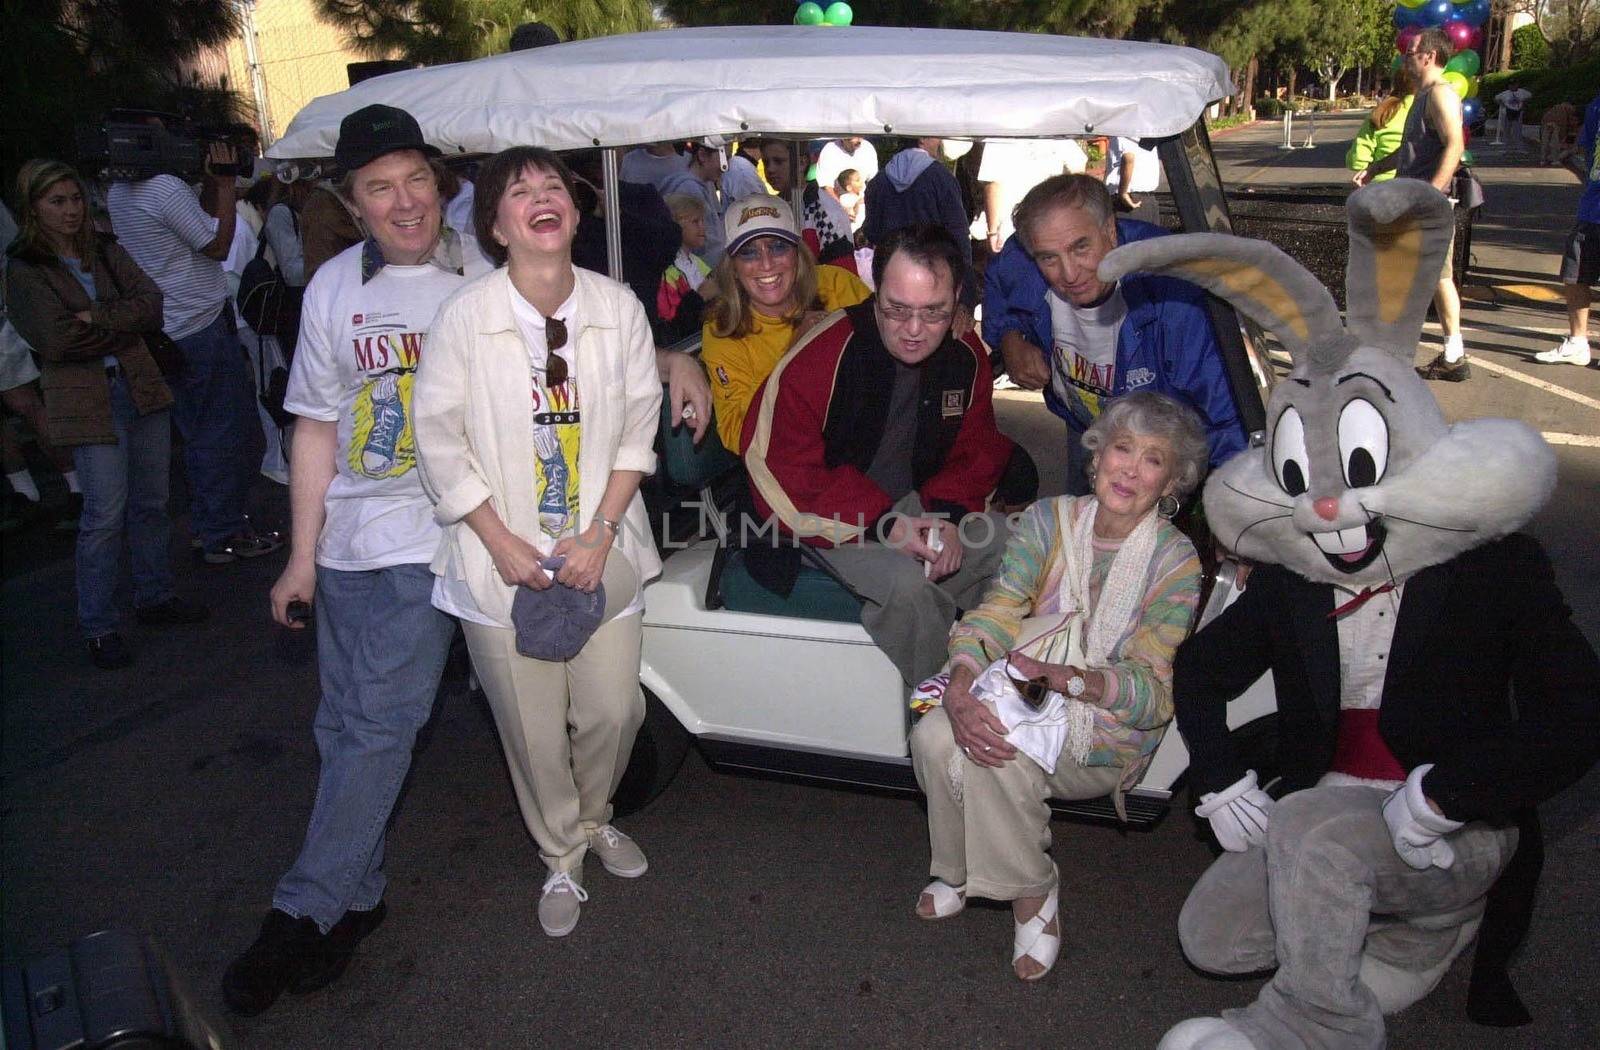 Cast of Laverne and Shirley at the MS Walk 2000, where the cast of "Laverne and Shirley" reunited. Burbank, 04-09-00